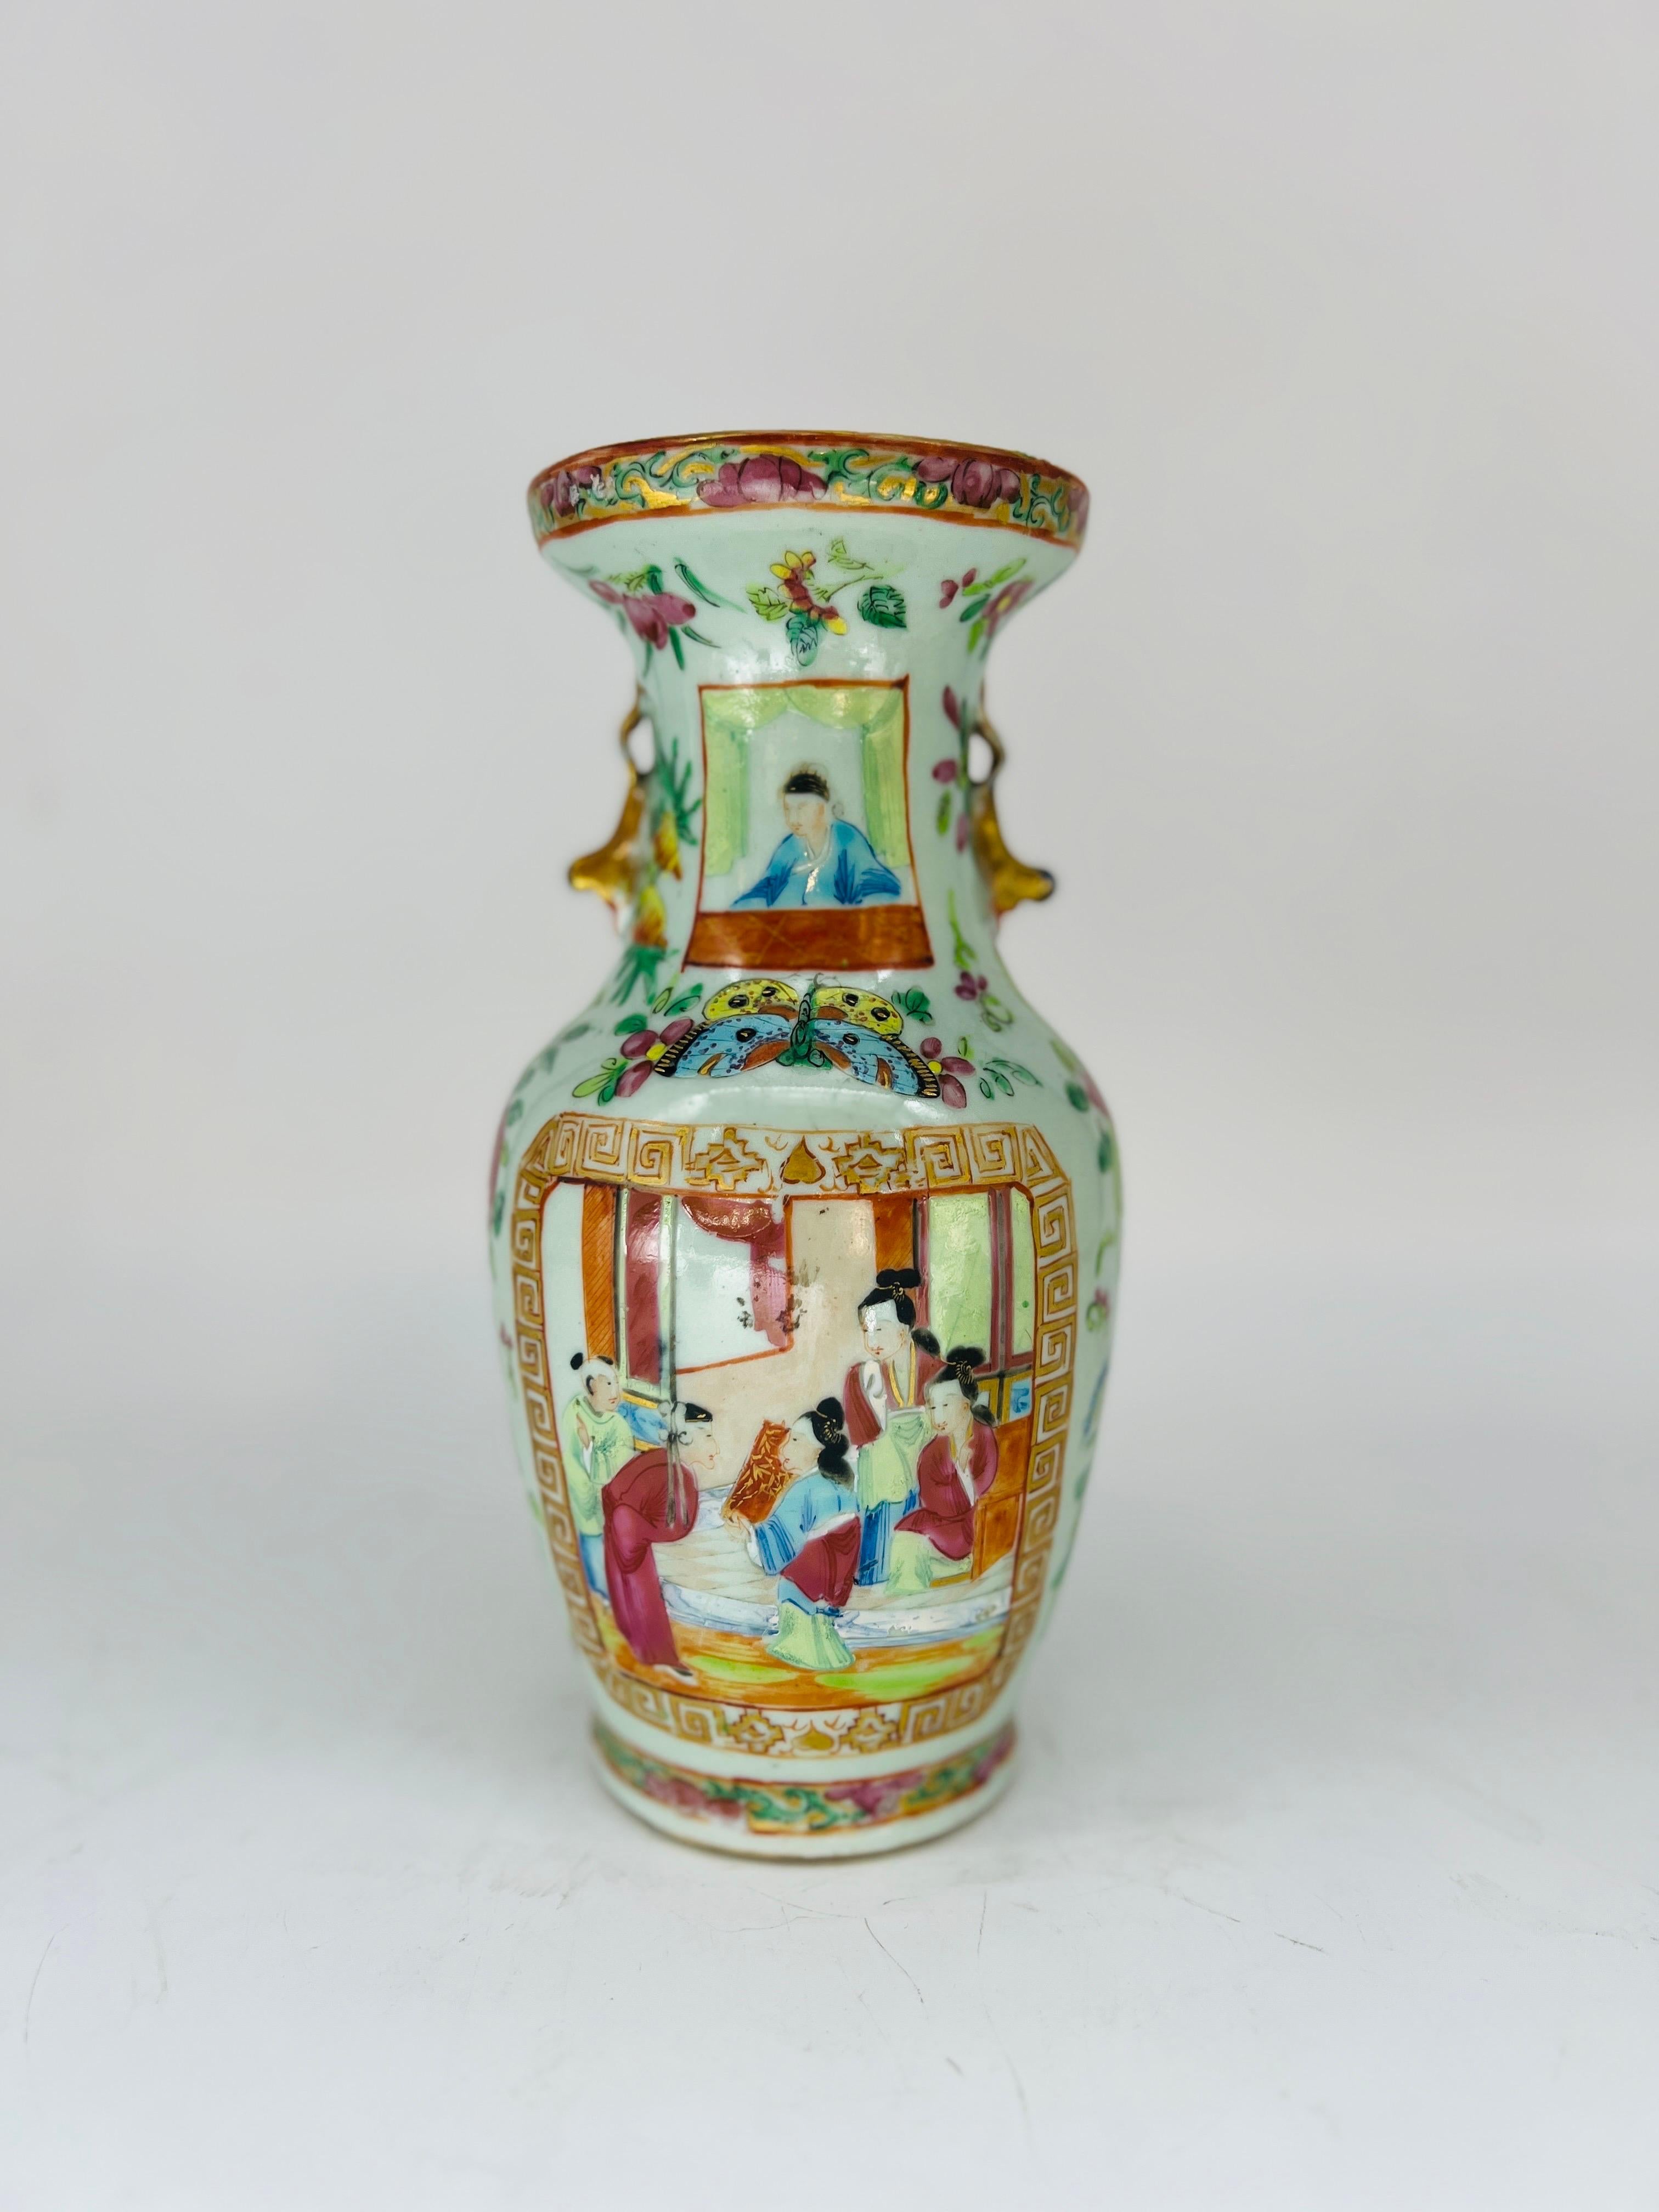 Chinese, 19th century.

Presented is a very unusual Chinese vase of traditional form, celadon glaze to the body and decorated with the popular famille rose medallion pattern. One side which has a window featuring a figural elder window and lots of